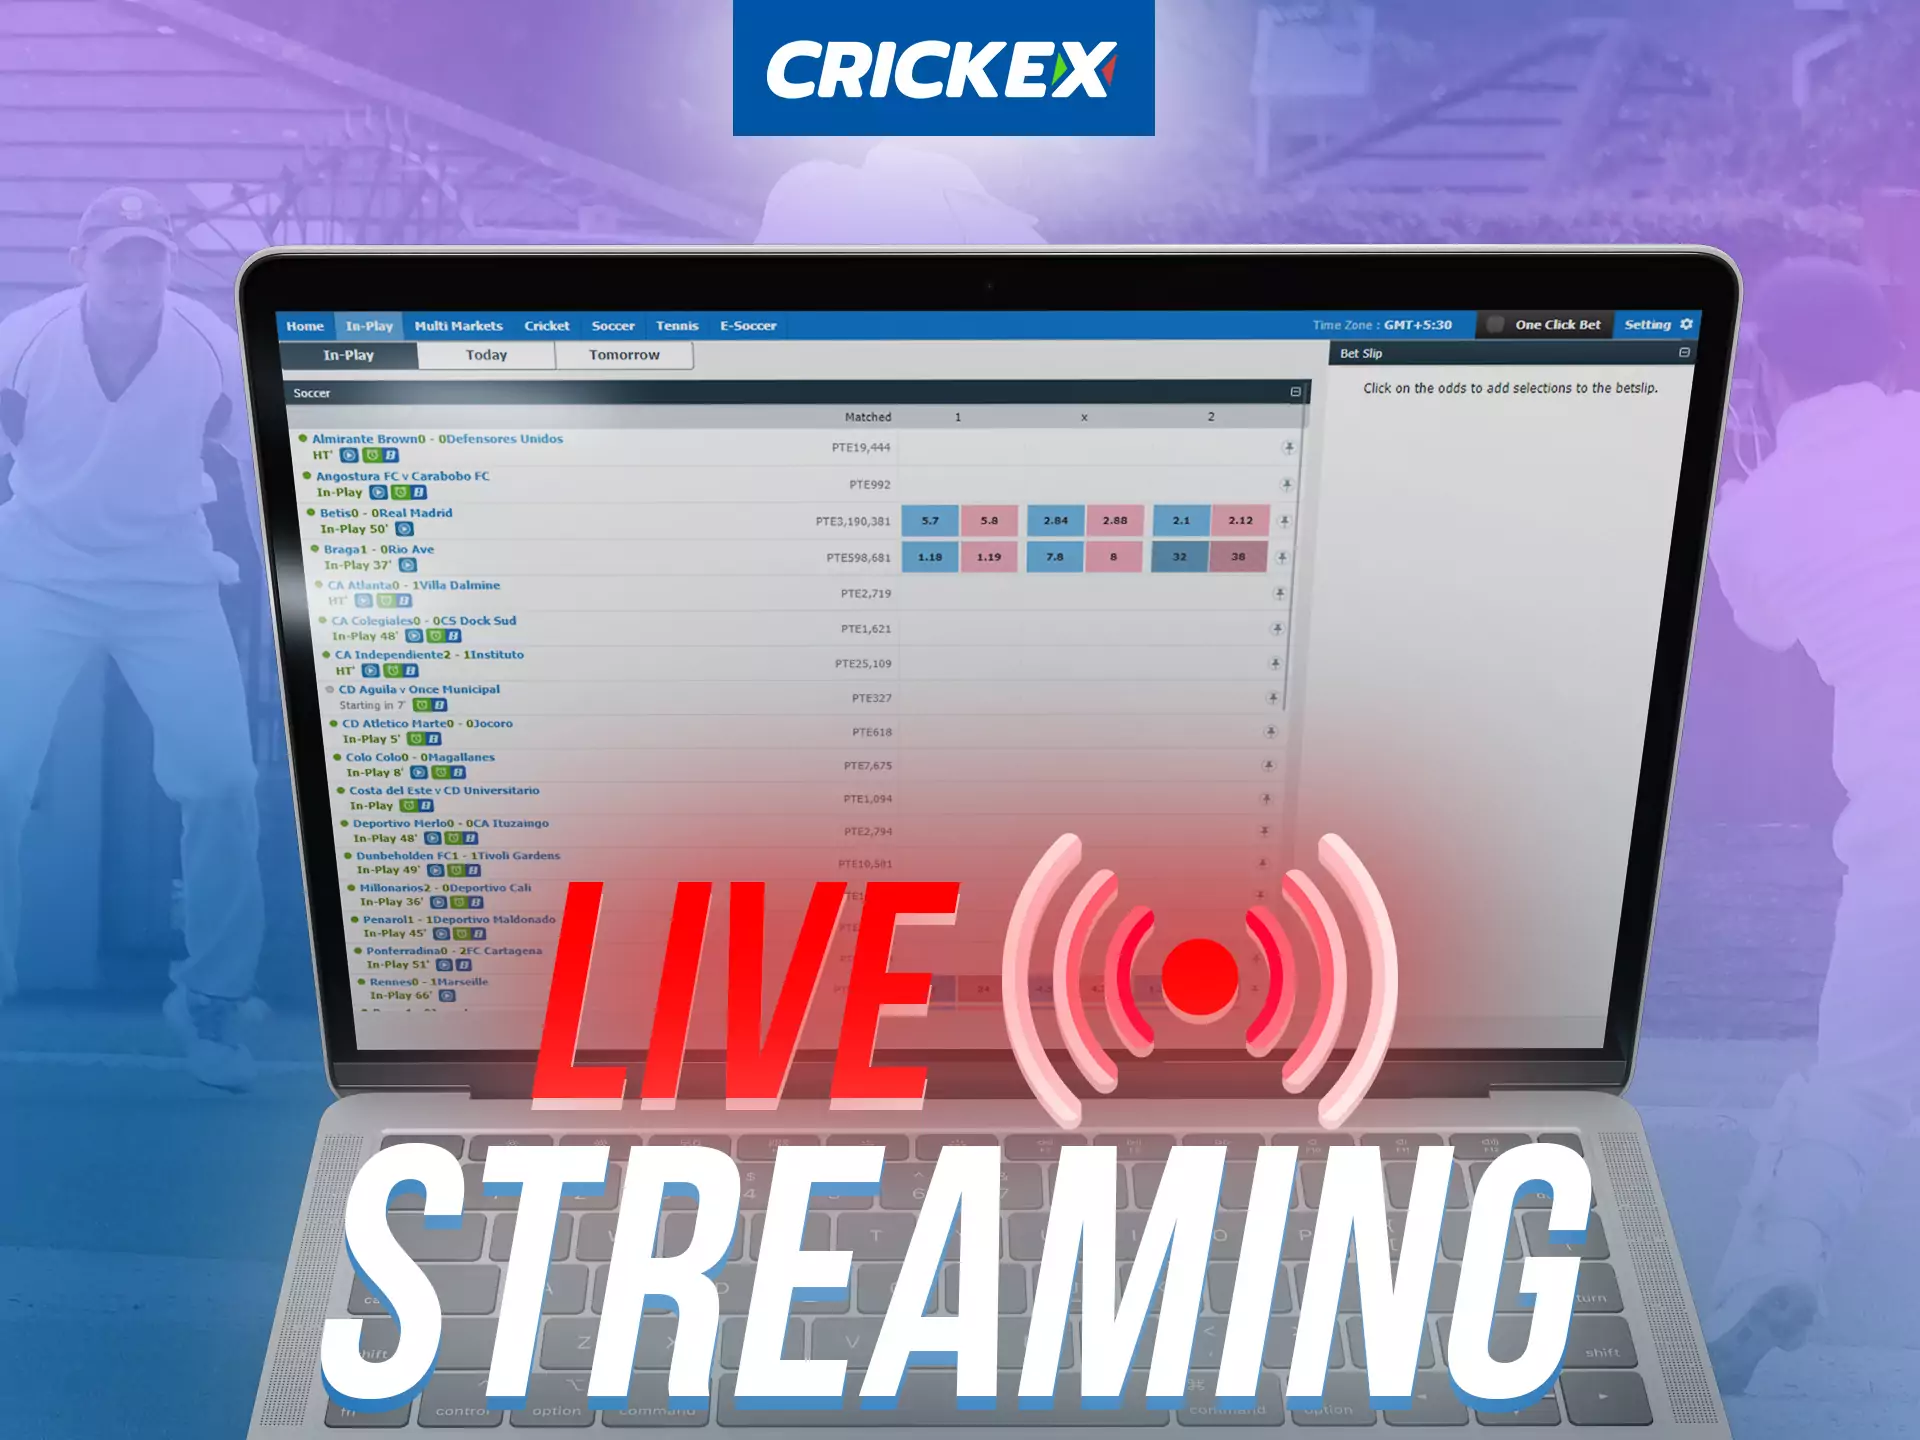 On Crickex, place your bets directly during the live streaming match.